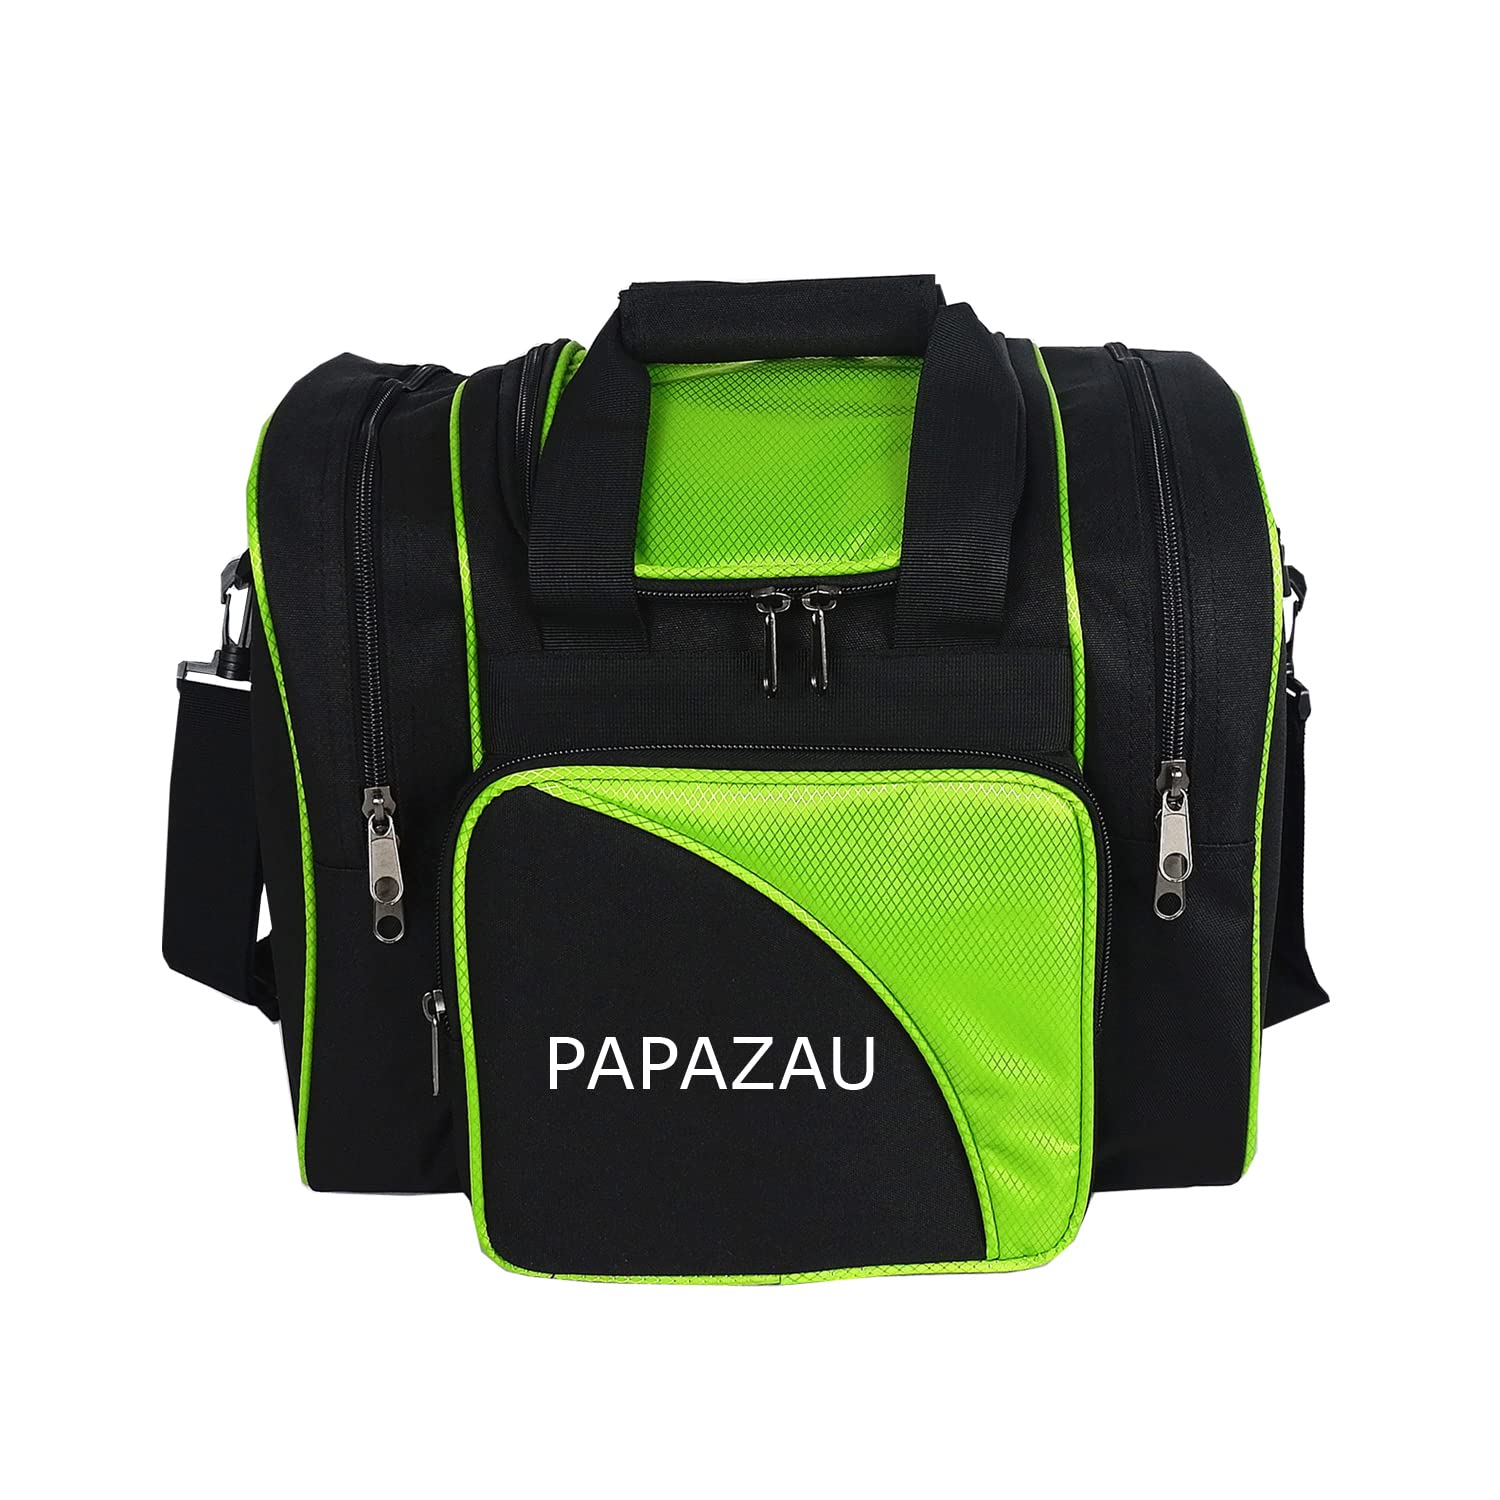 Papazau Bowling Bag For Single Ball - Single Ball Tote Bag With Padded Ball Holder - Fits A Single Pair Of Bowling Shoes Up To M